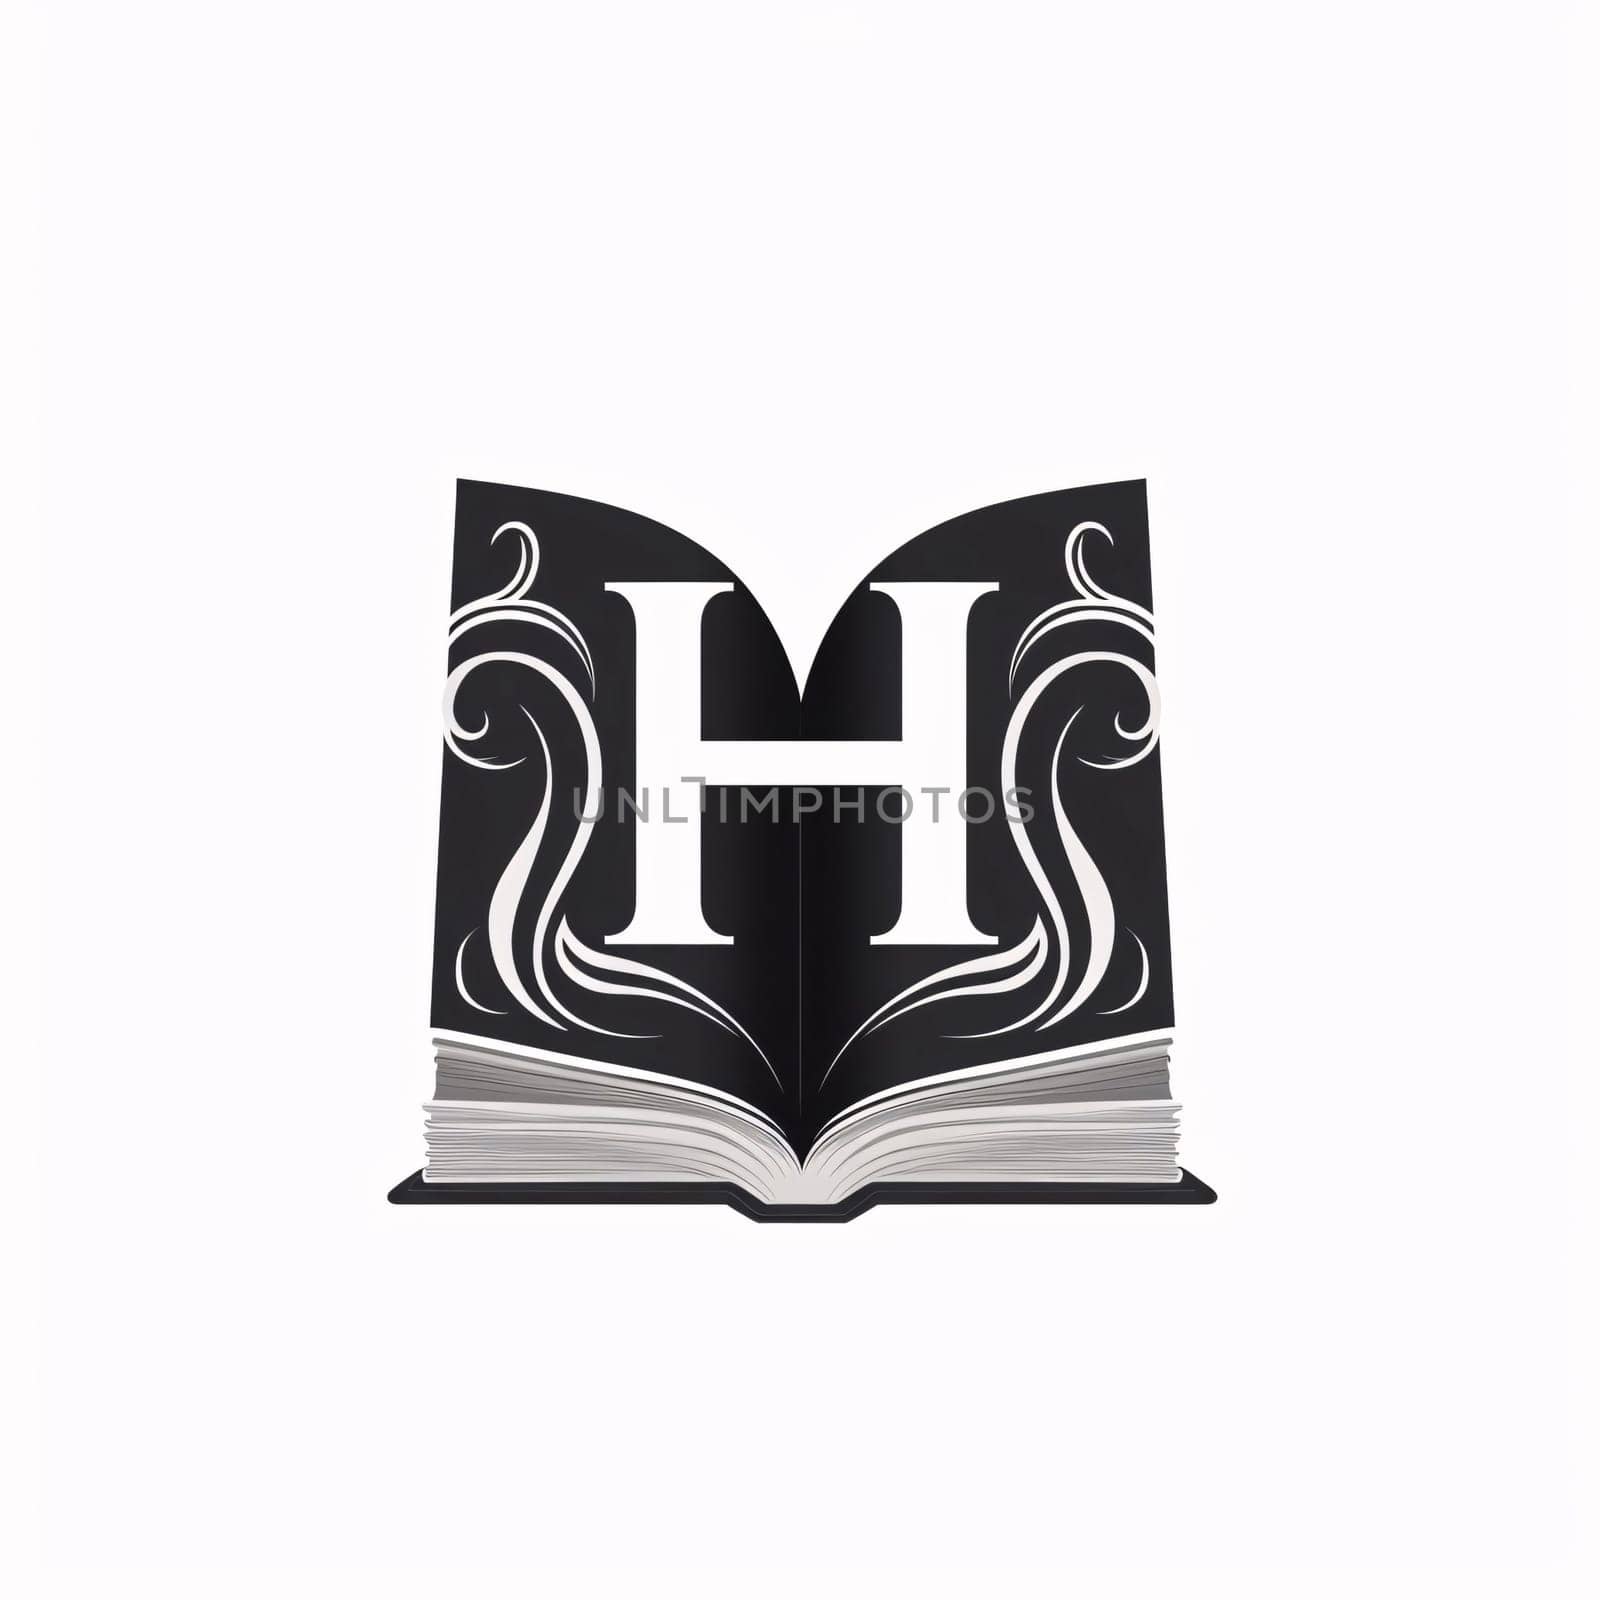 Graphic alphabet letters: Letter H in a book, black and white, vector illustration.